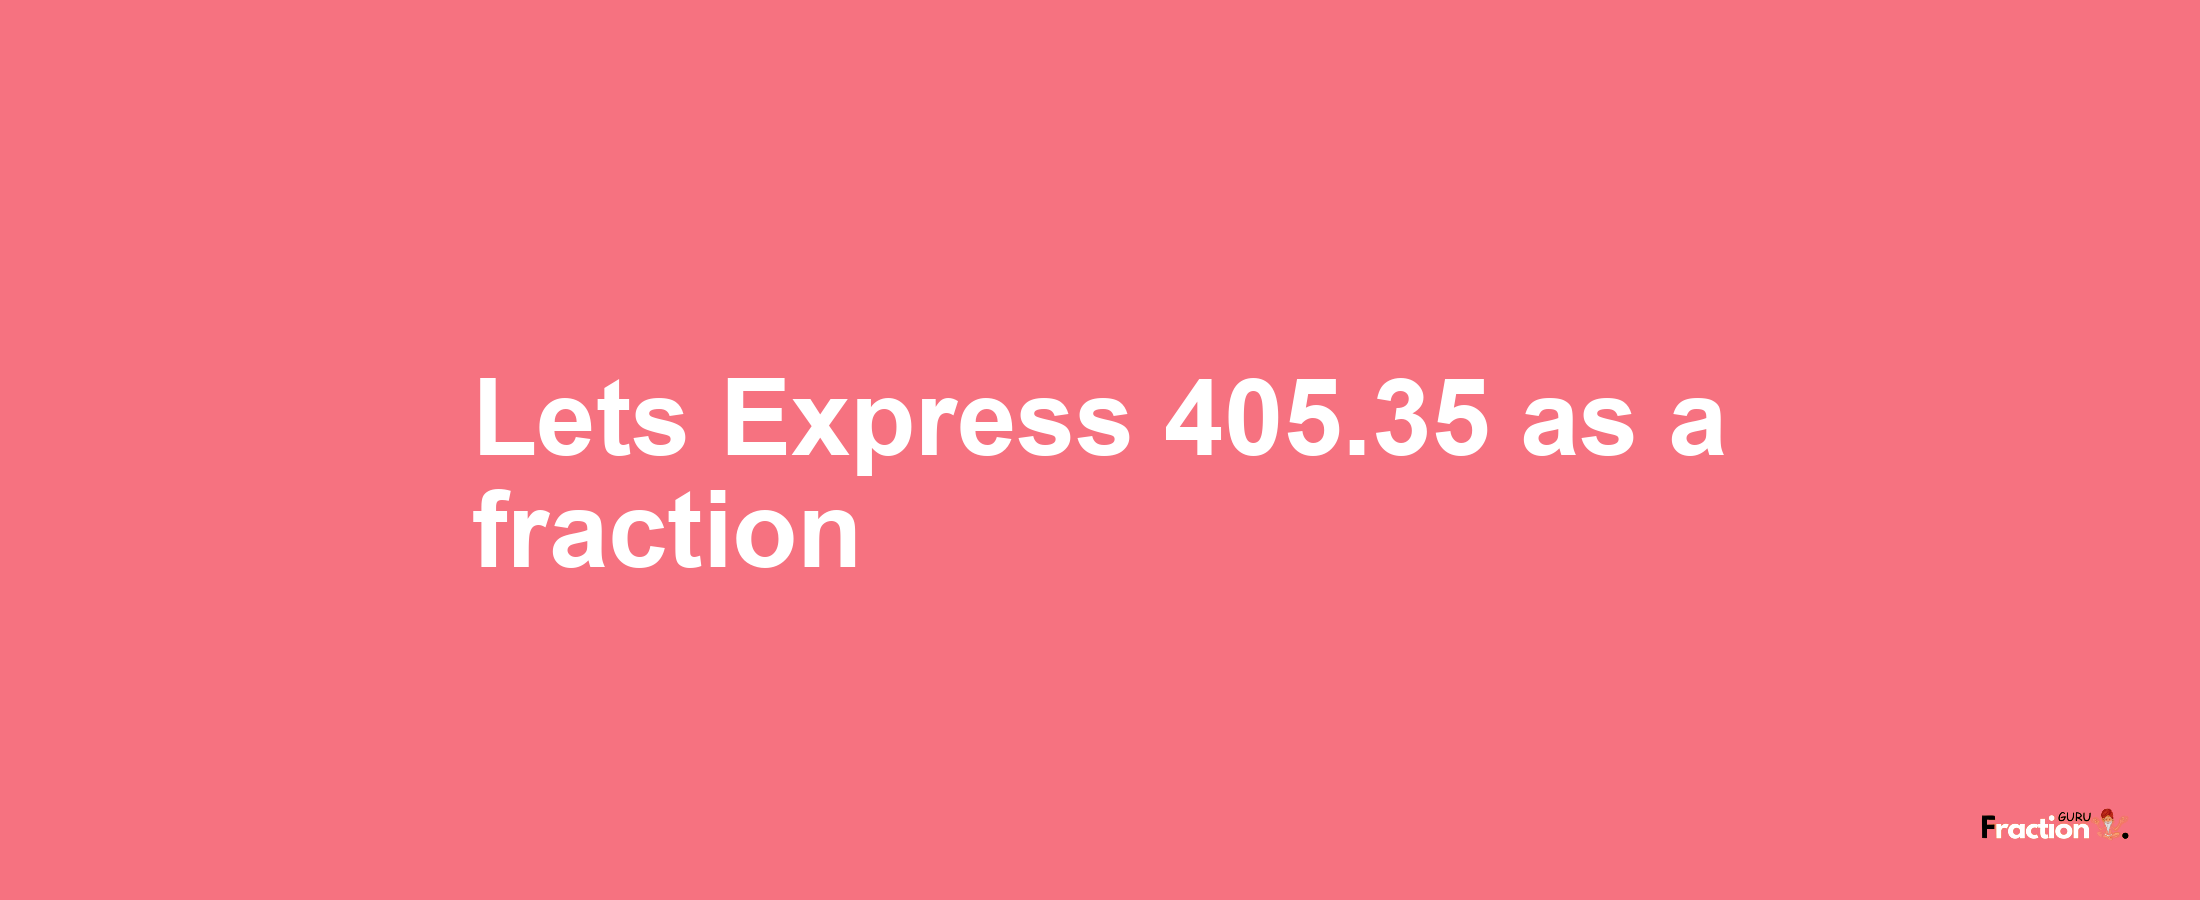 Lets Express 405.35 as afraction